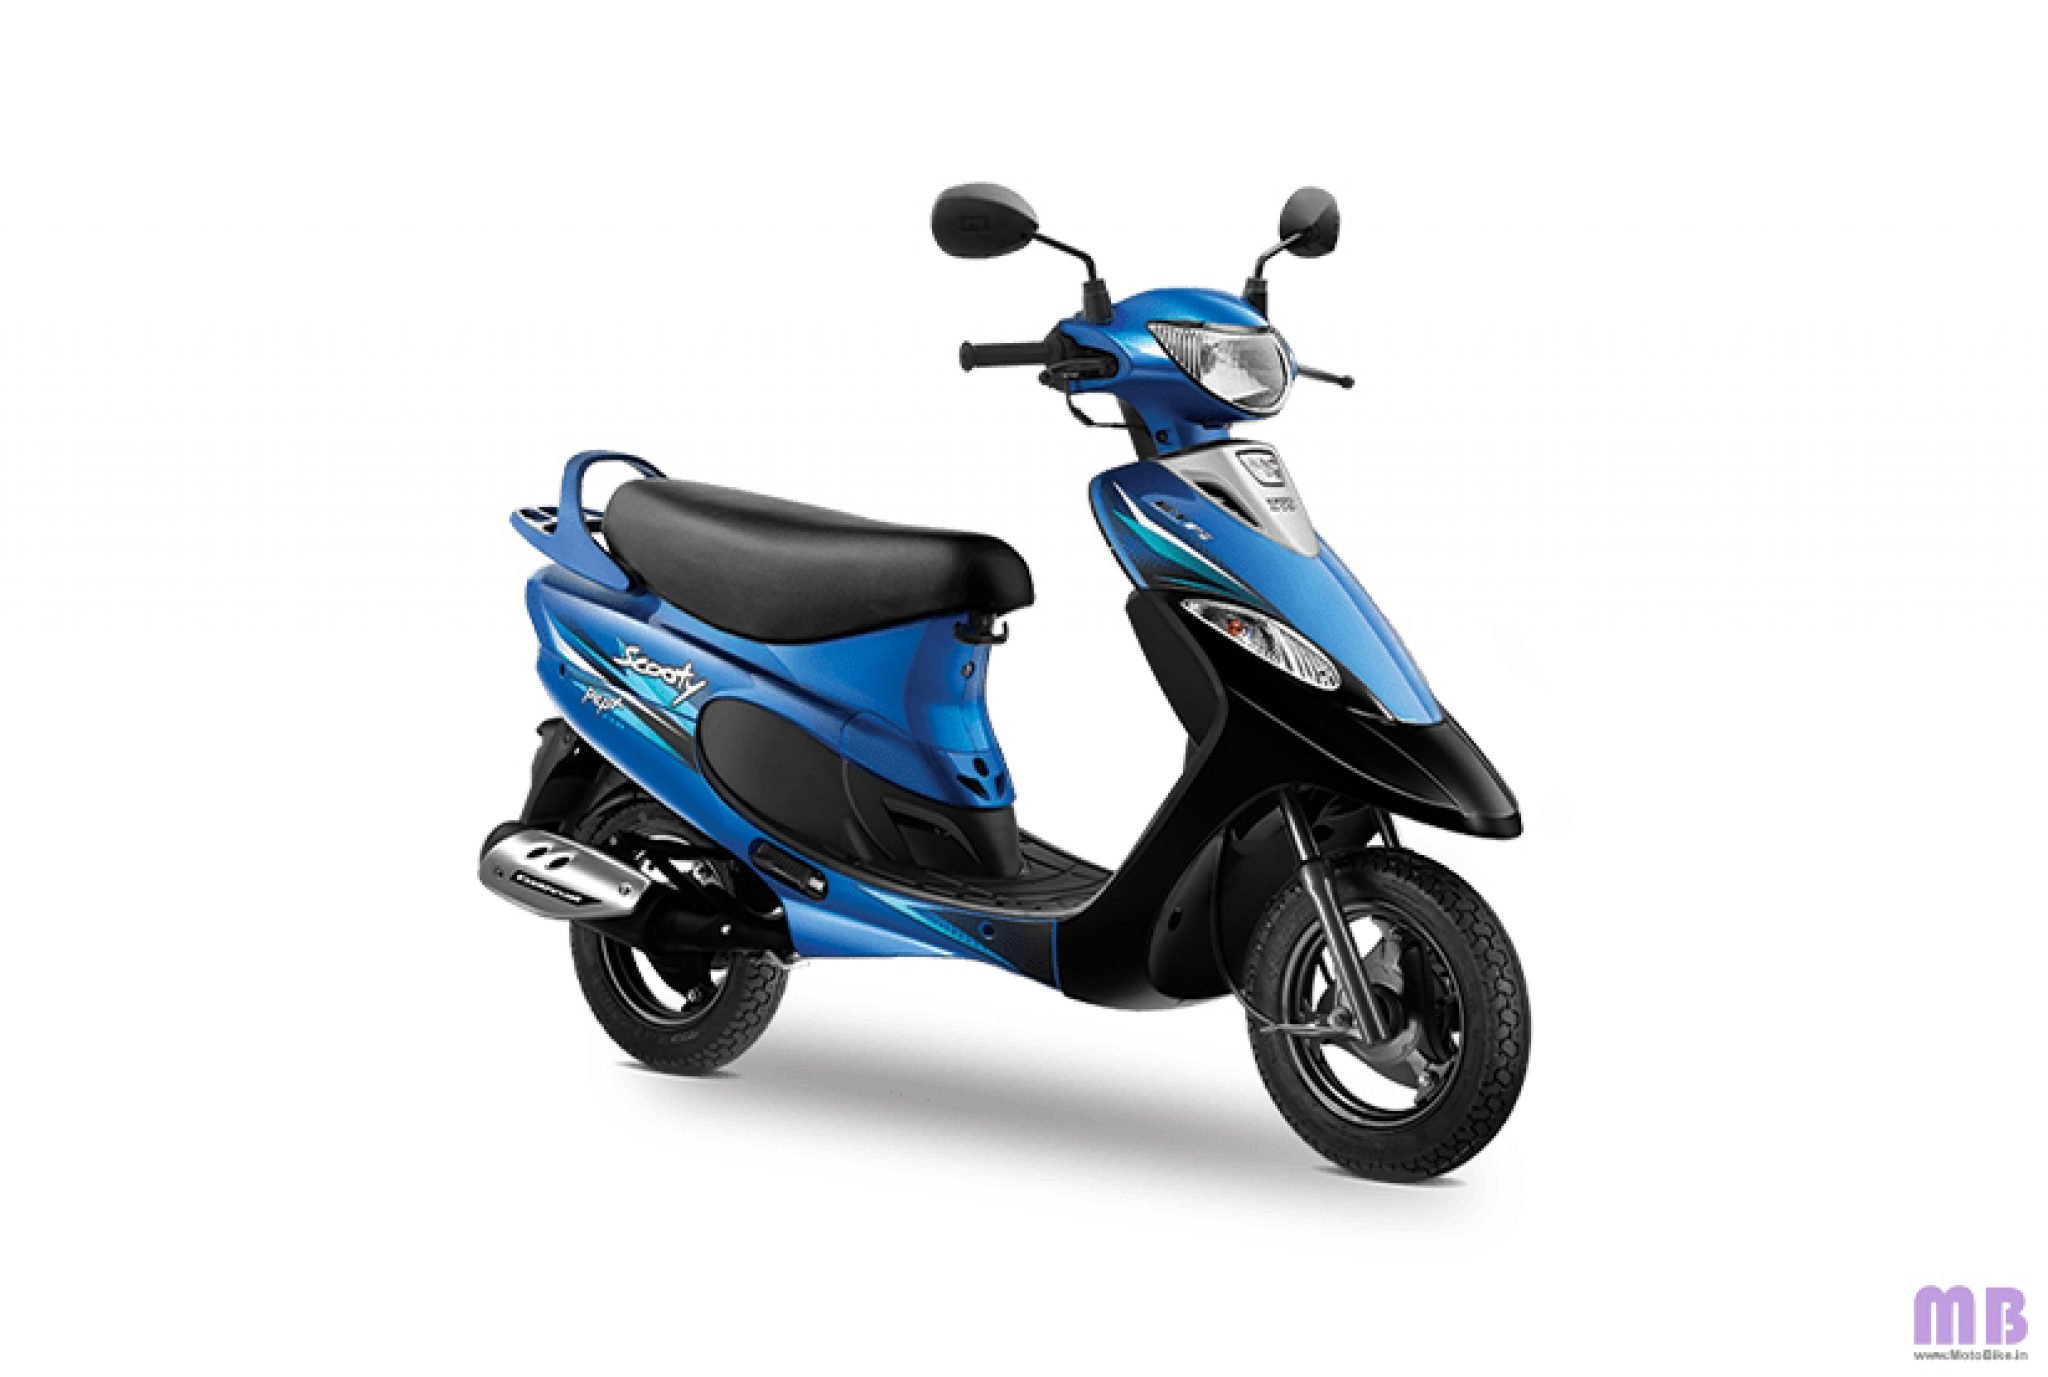 TVS Scooty Pep Plus BS6 Price, Specs, Colours, Mileage, Review